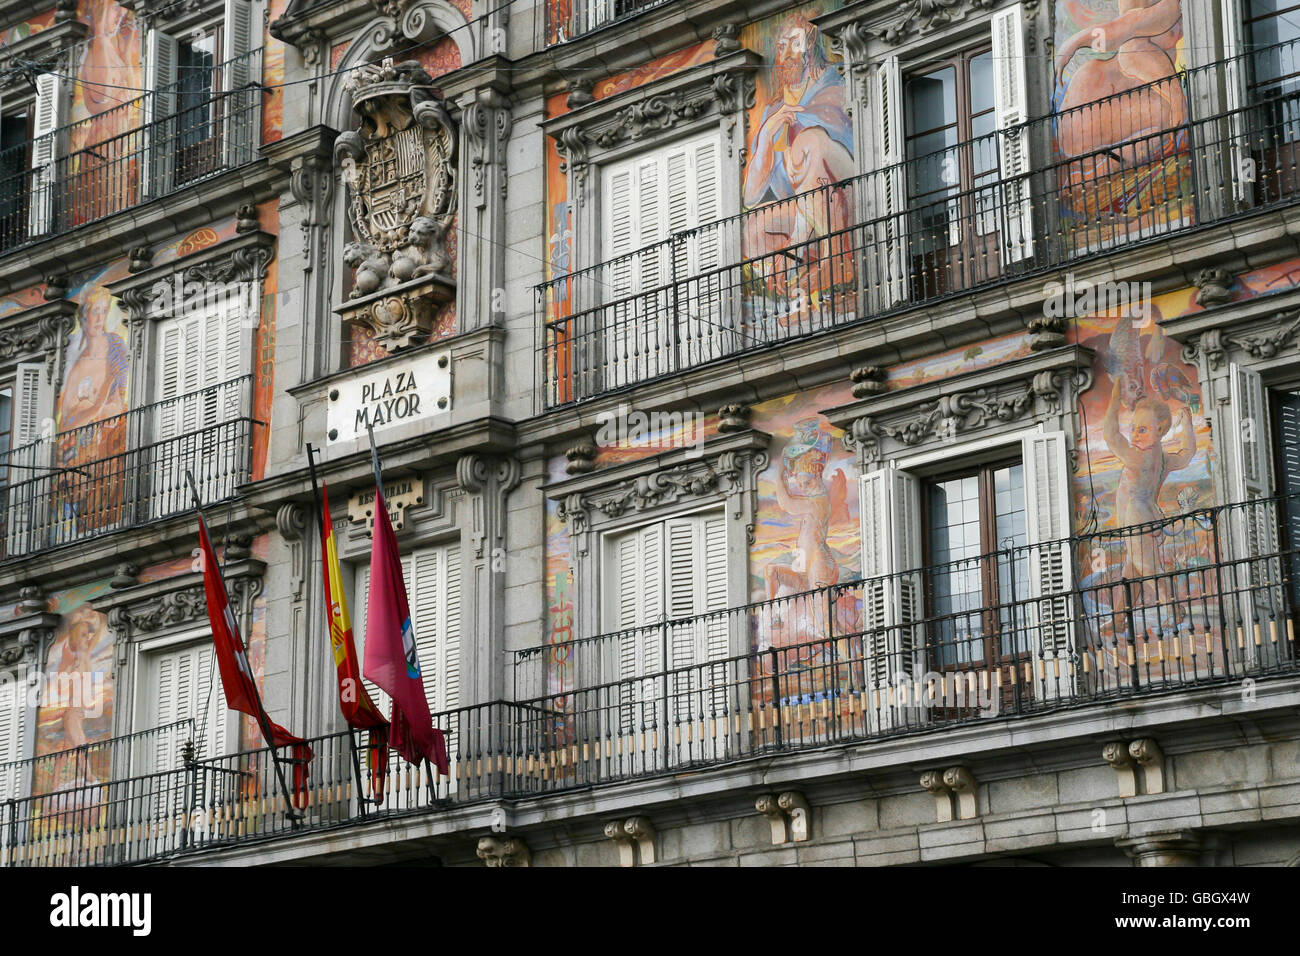 Decorated facade in a building of Plaza Mayor, a large square and popular tourist destination in Madrid, Spain Stock Photo